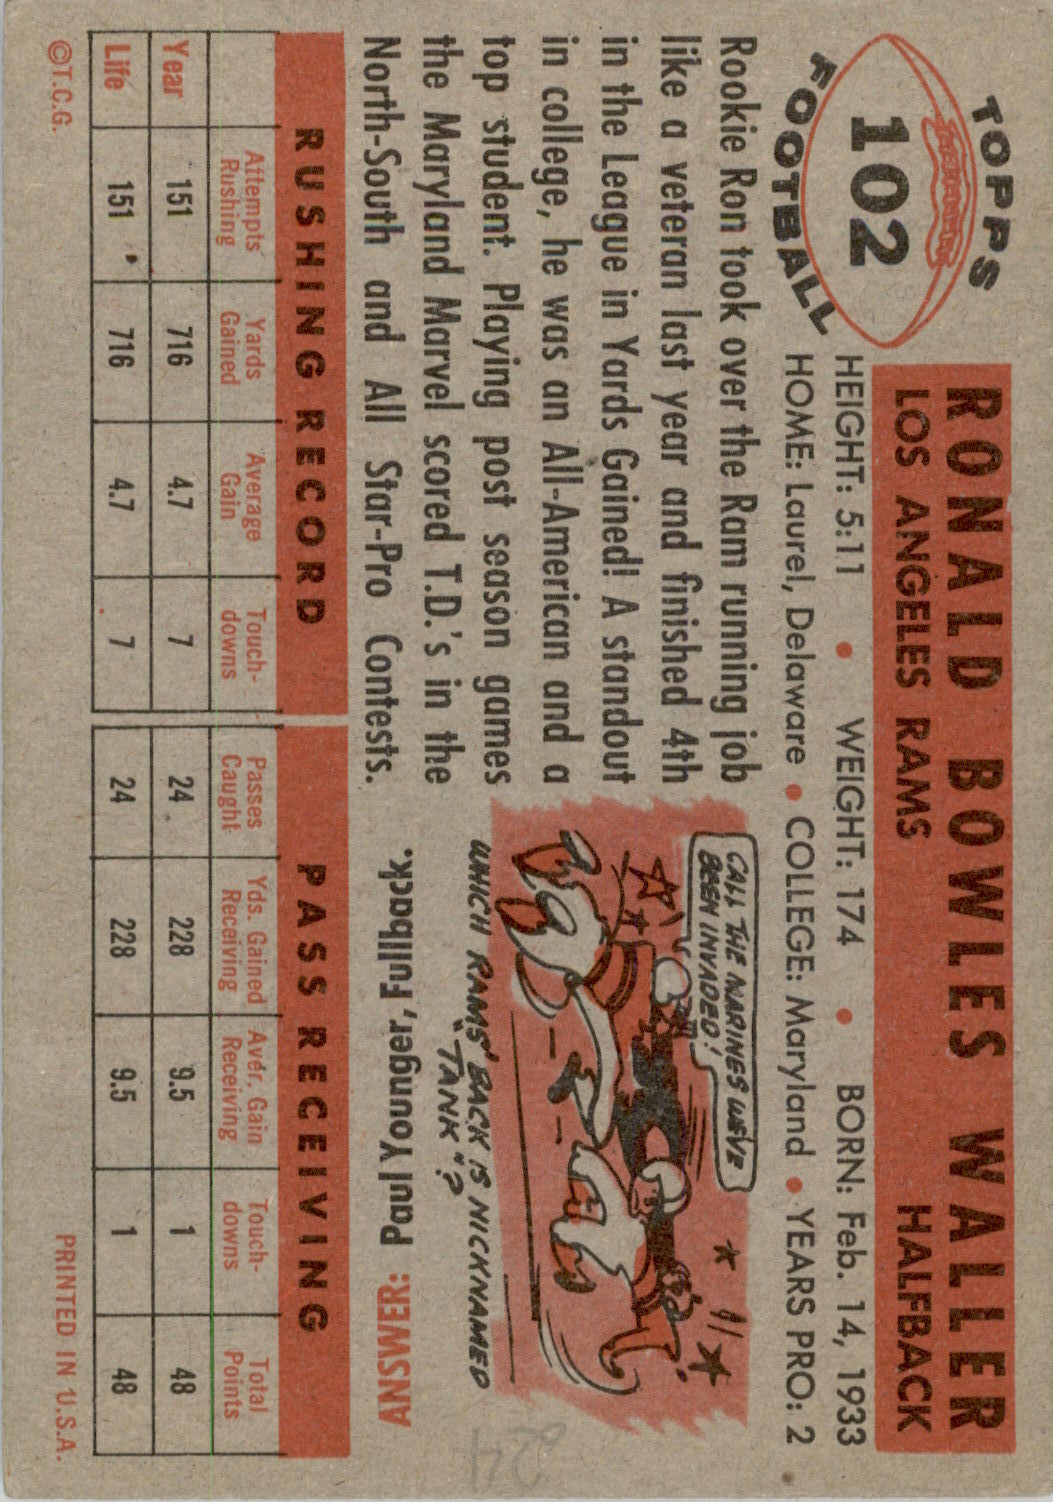 1956 Topps #102 Ron Waller RC back image